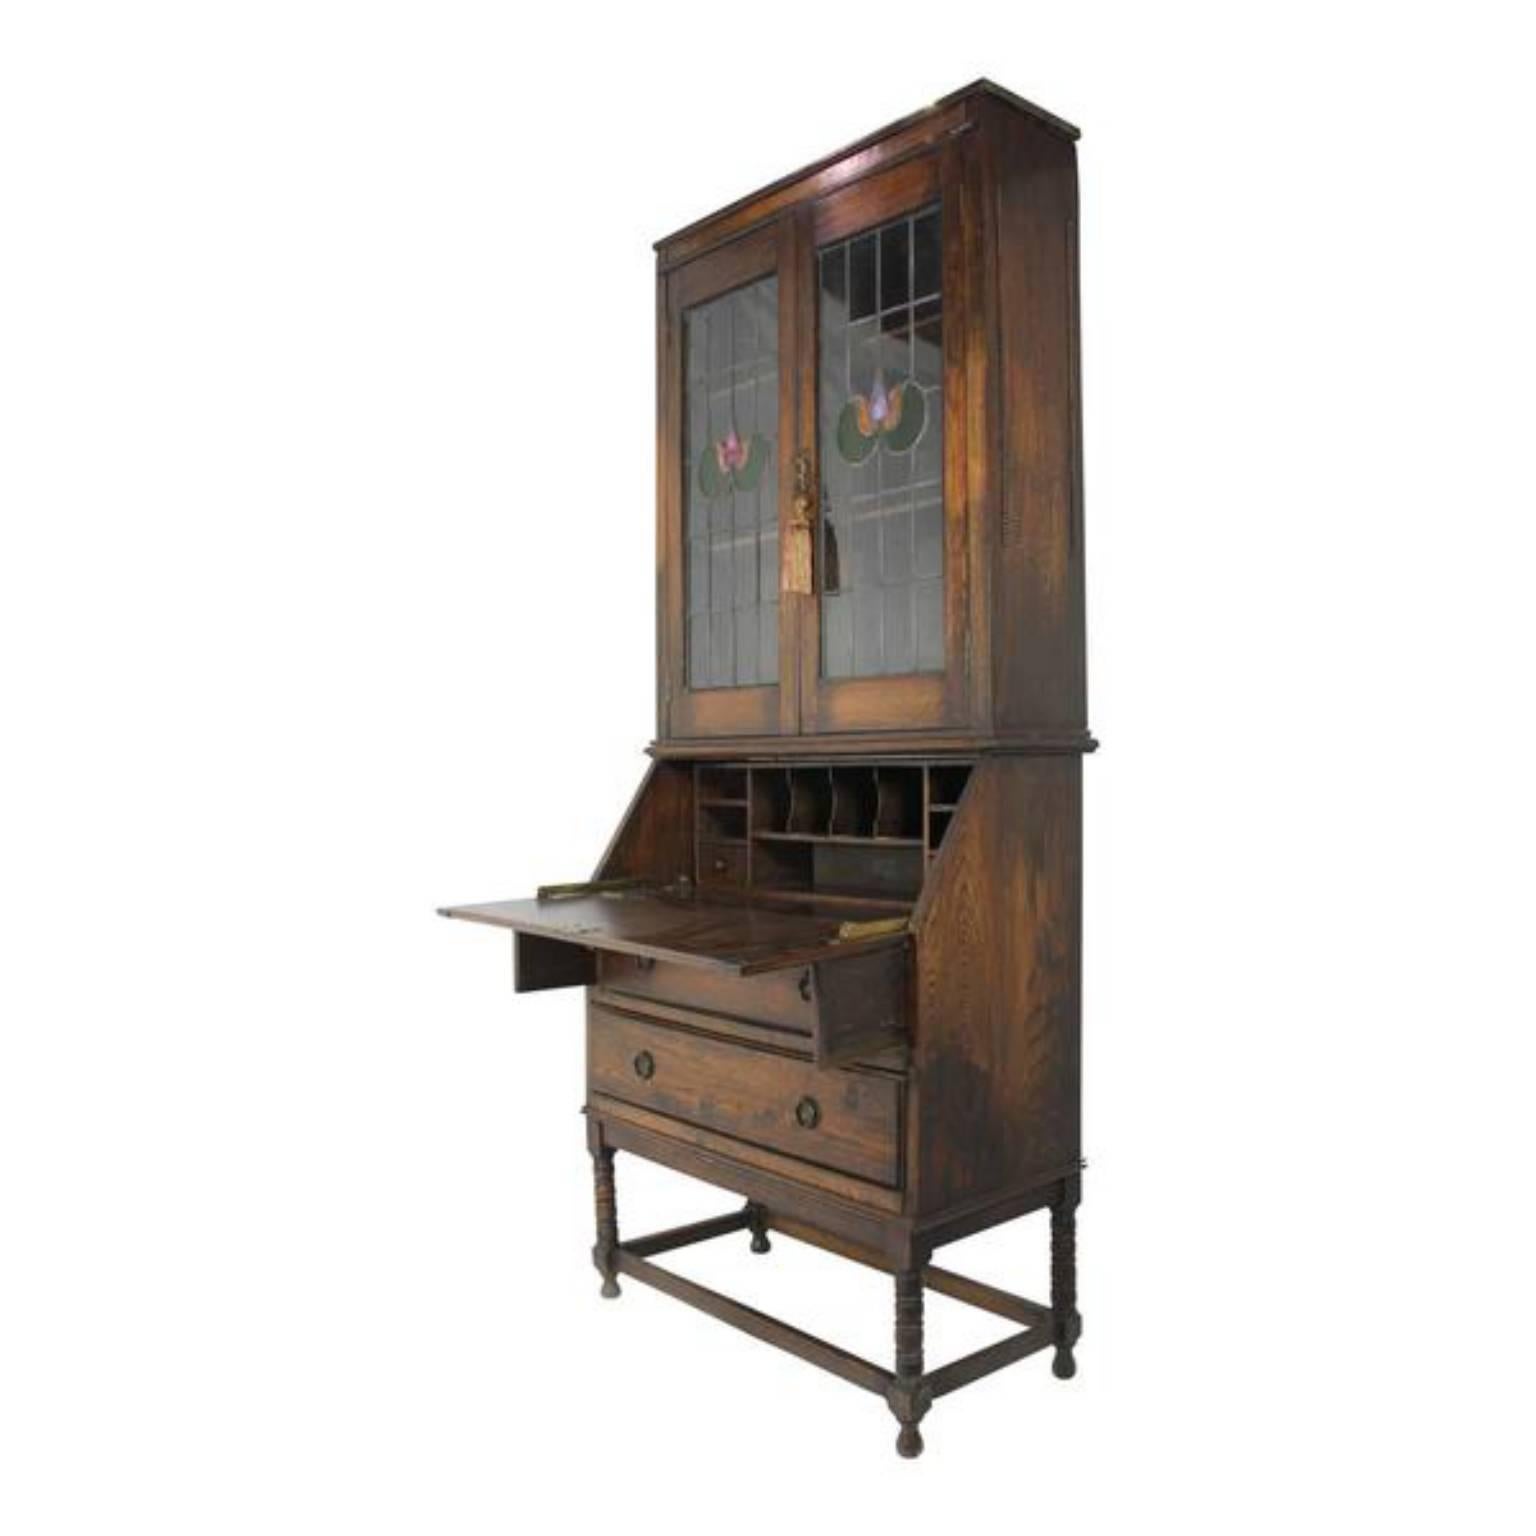 Fold down the writing surface to extend the supports, revealing nine cubby holes and two small drawers and underneath two larger drawers for storage. Lovely arts and crafts cut-glass panels on the upper case with two shelves. Both the desk front and